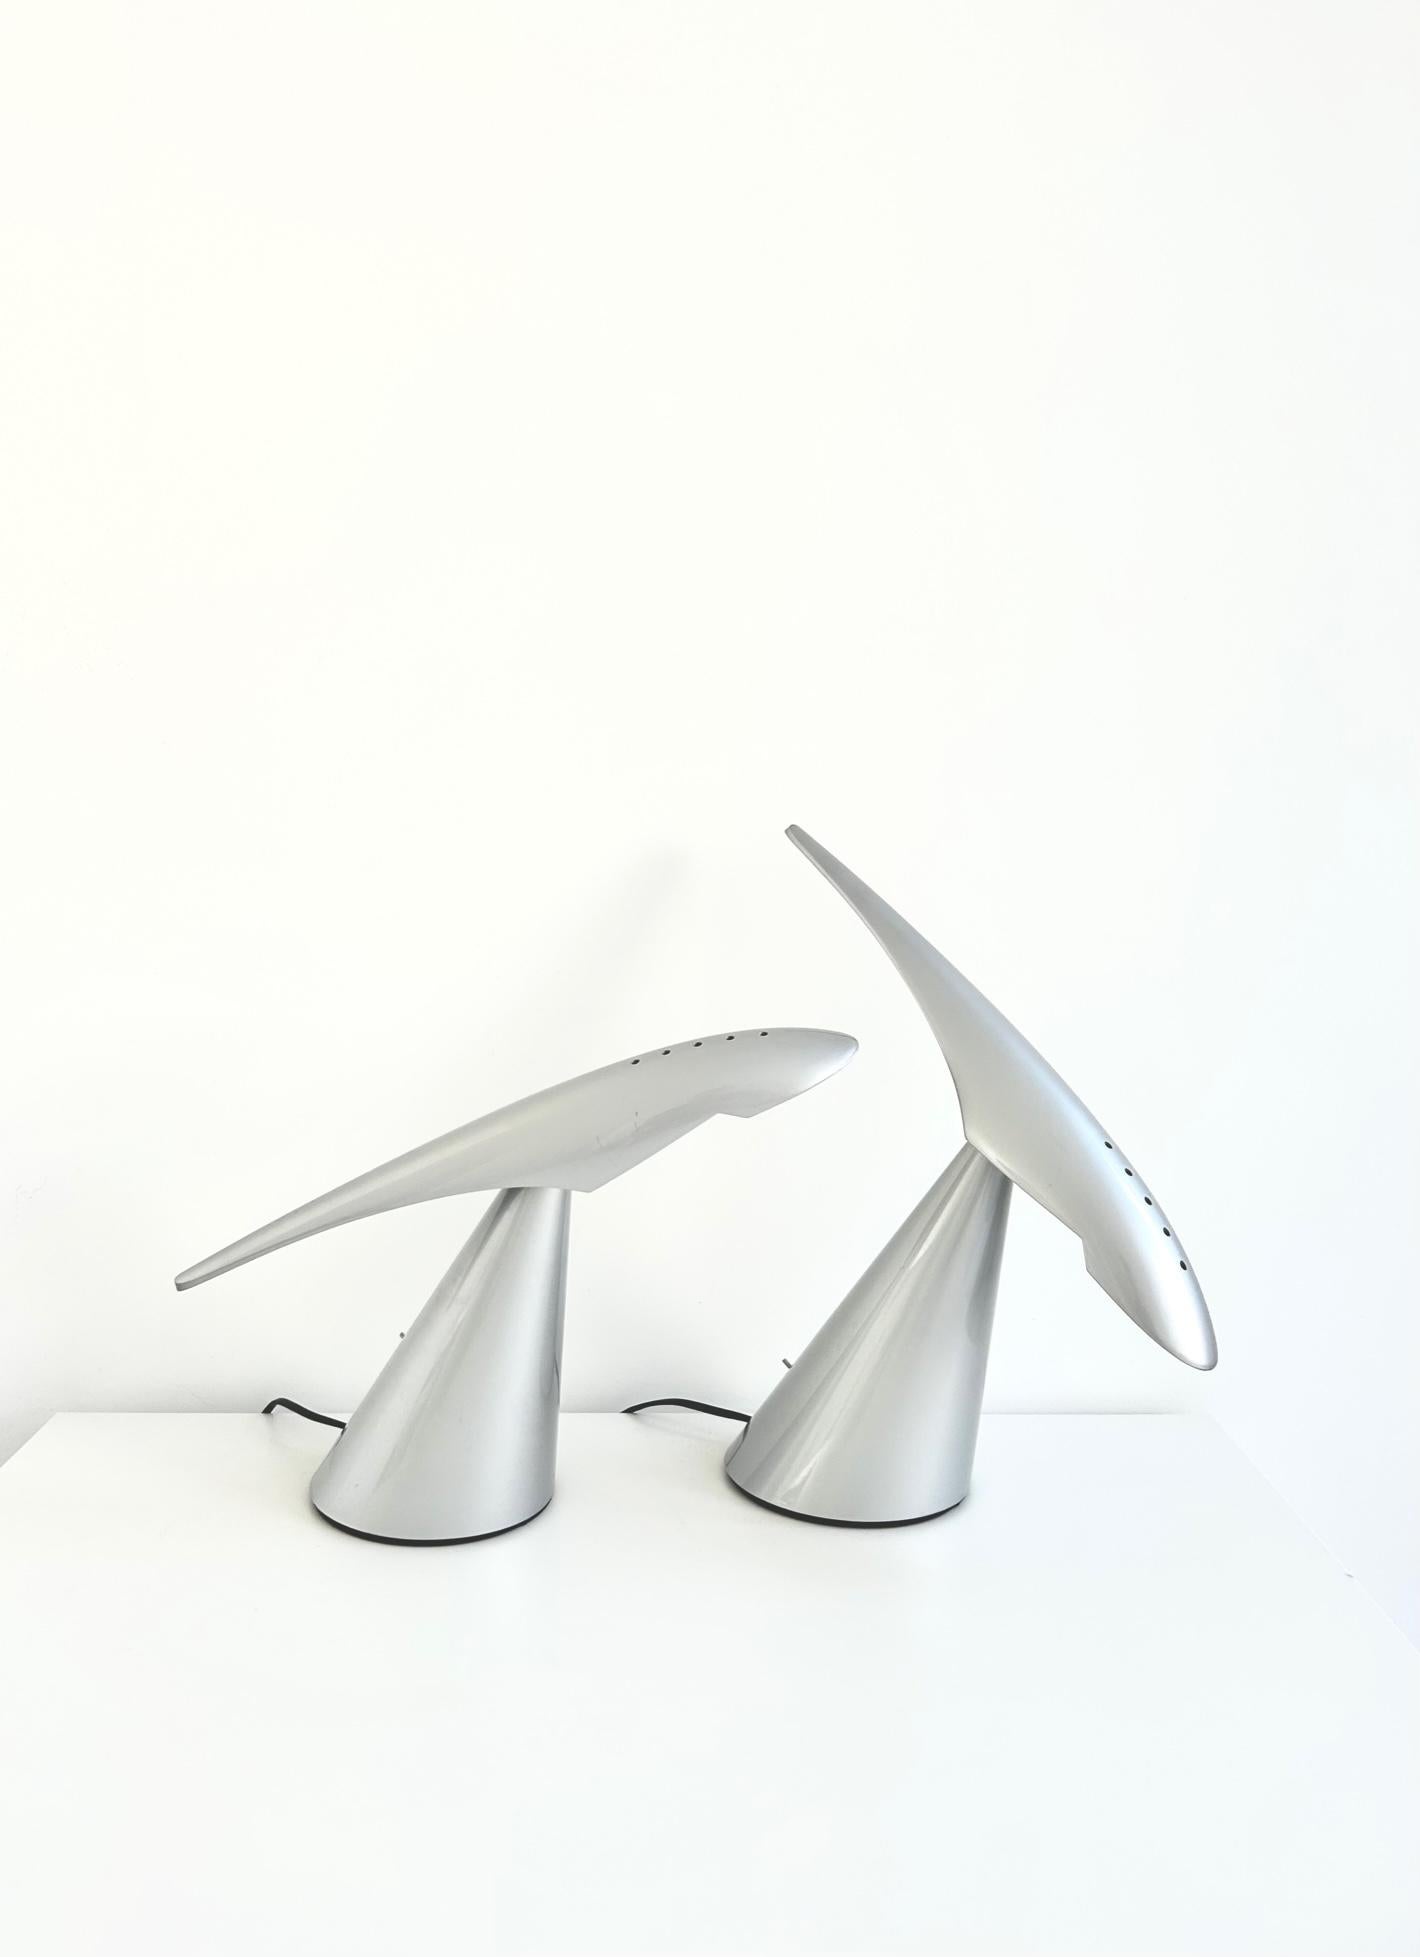 German Pair of Ran Desk Lamps, Peter Naumann, ClassiCon, 1990s For Sale